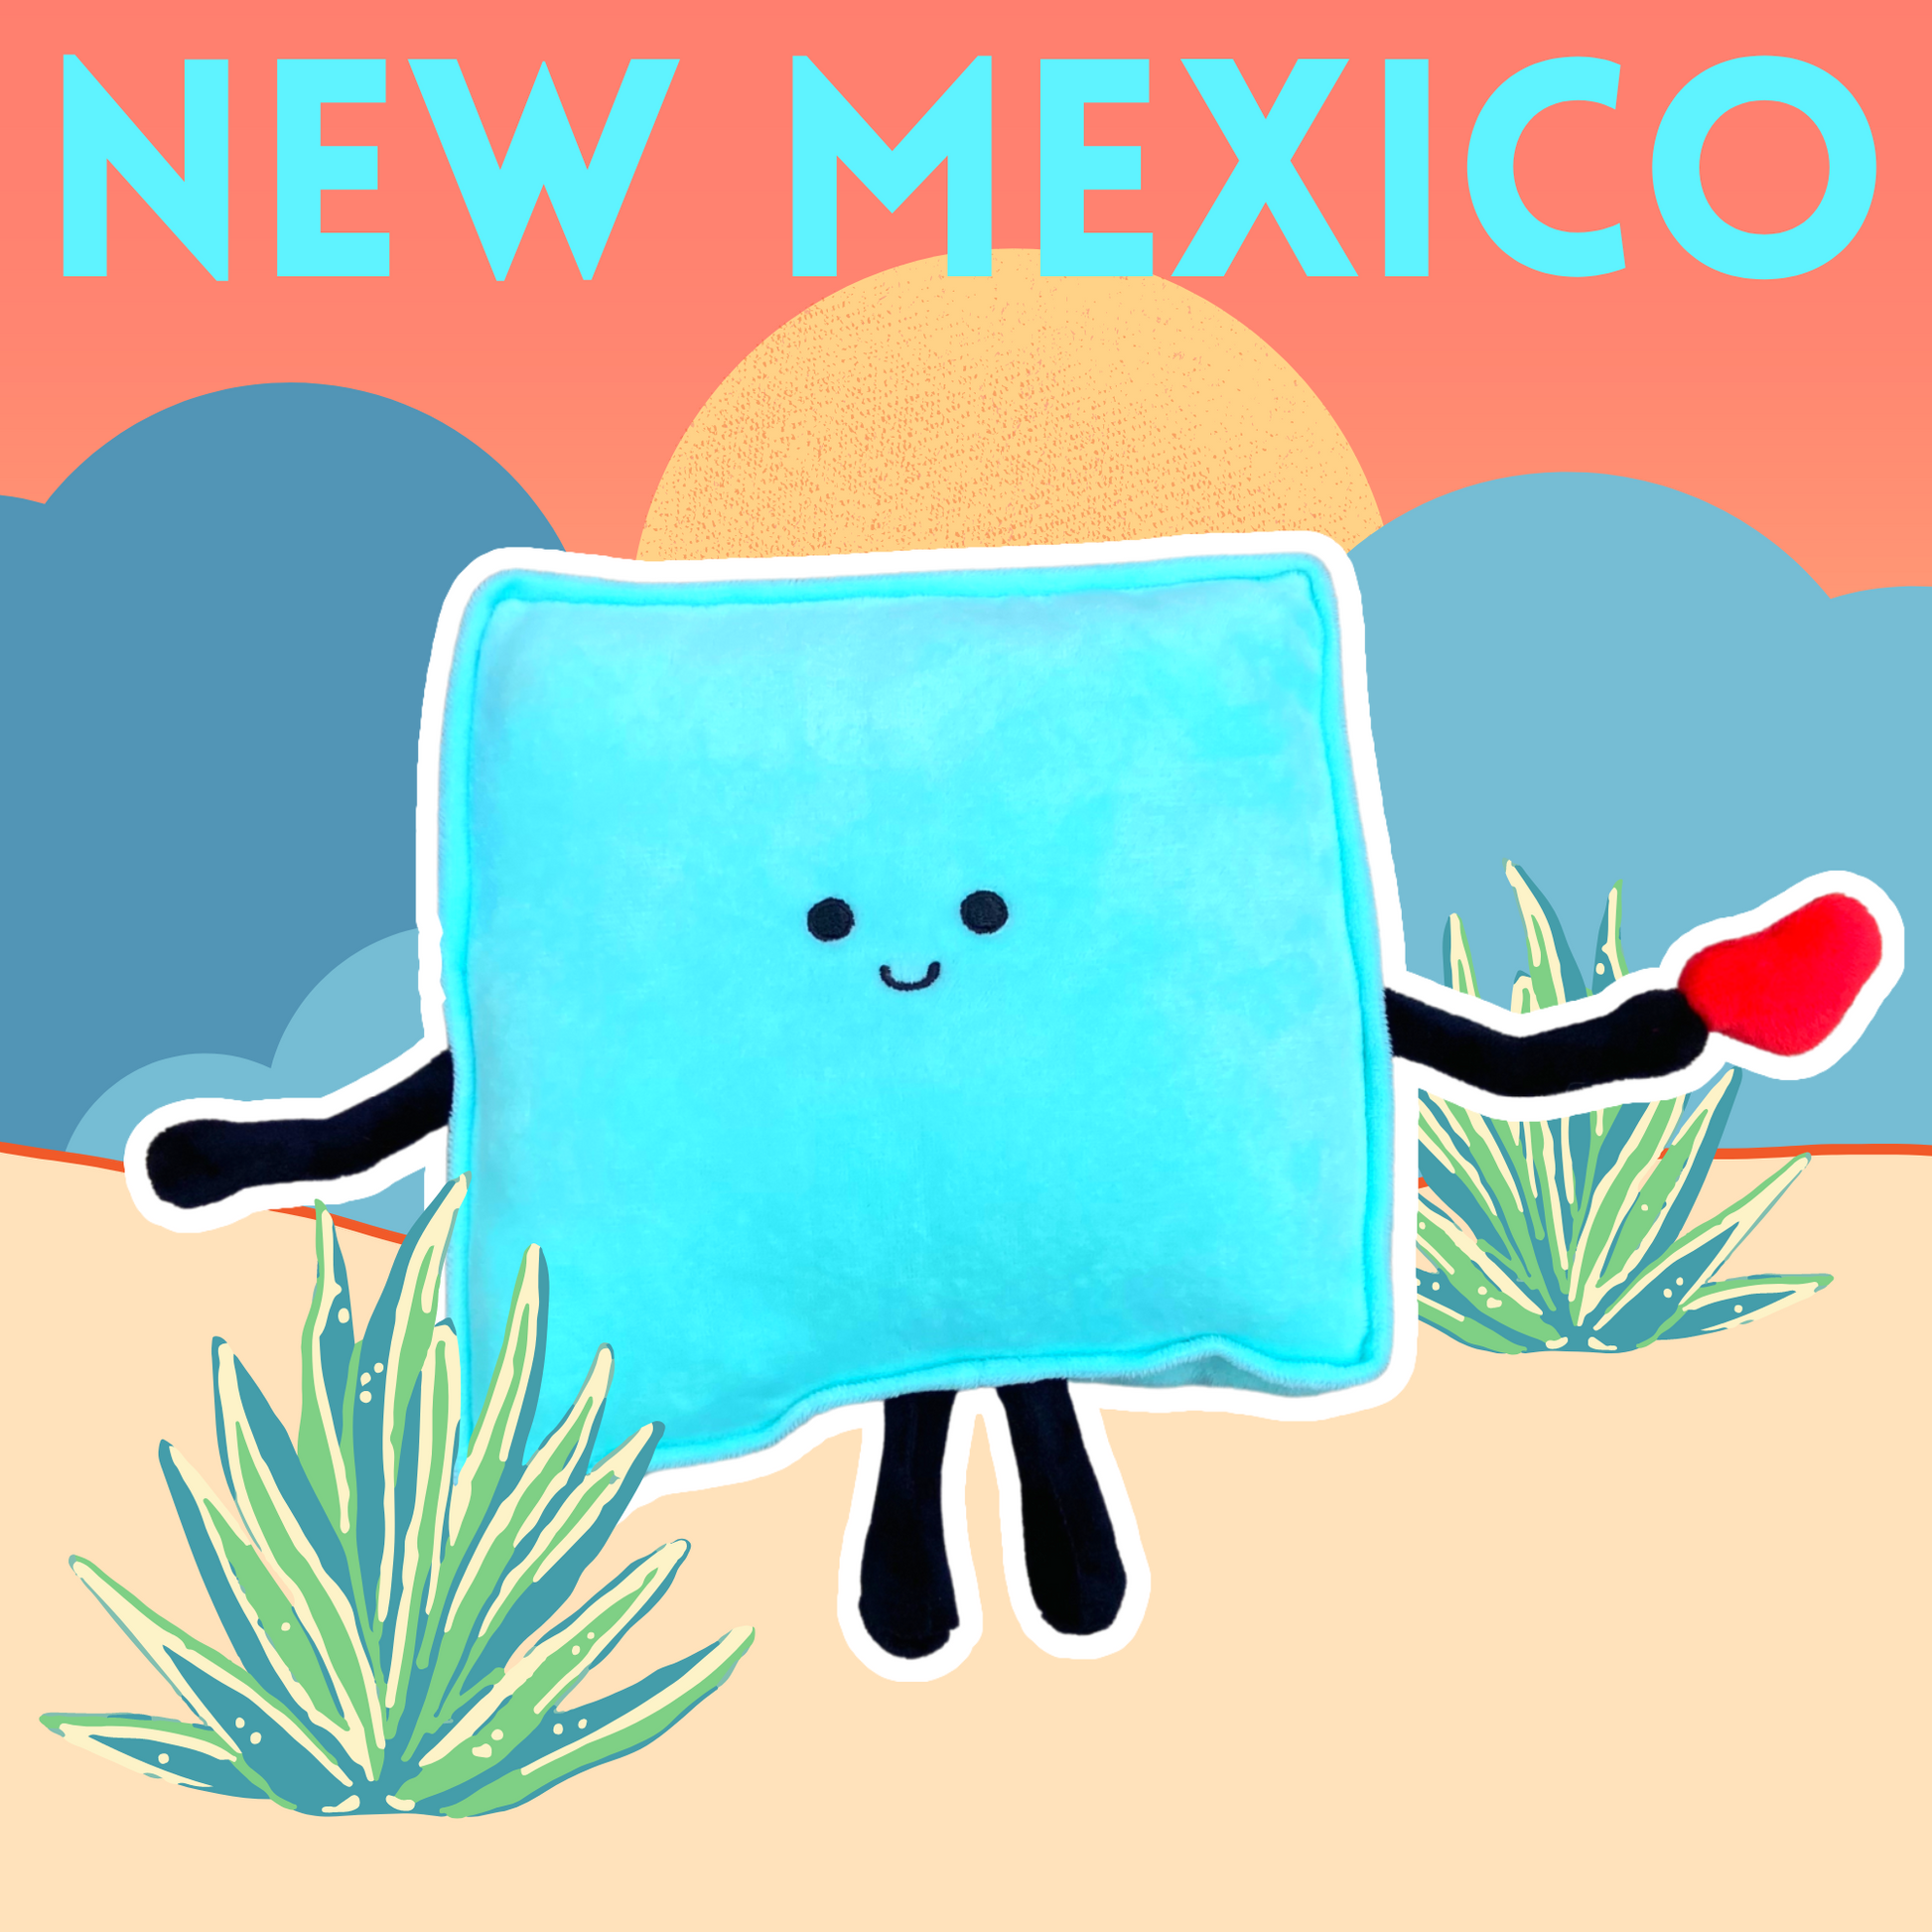 State of New Mexico, New Mexico